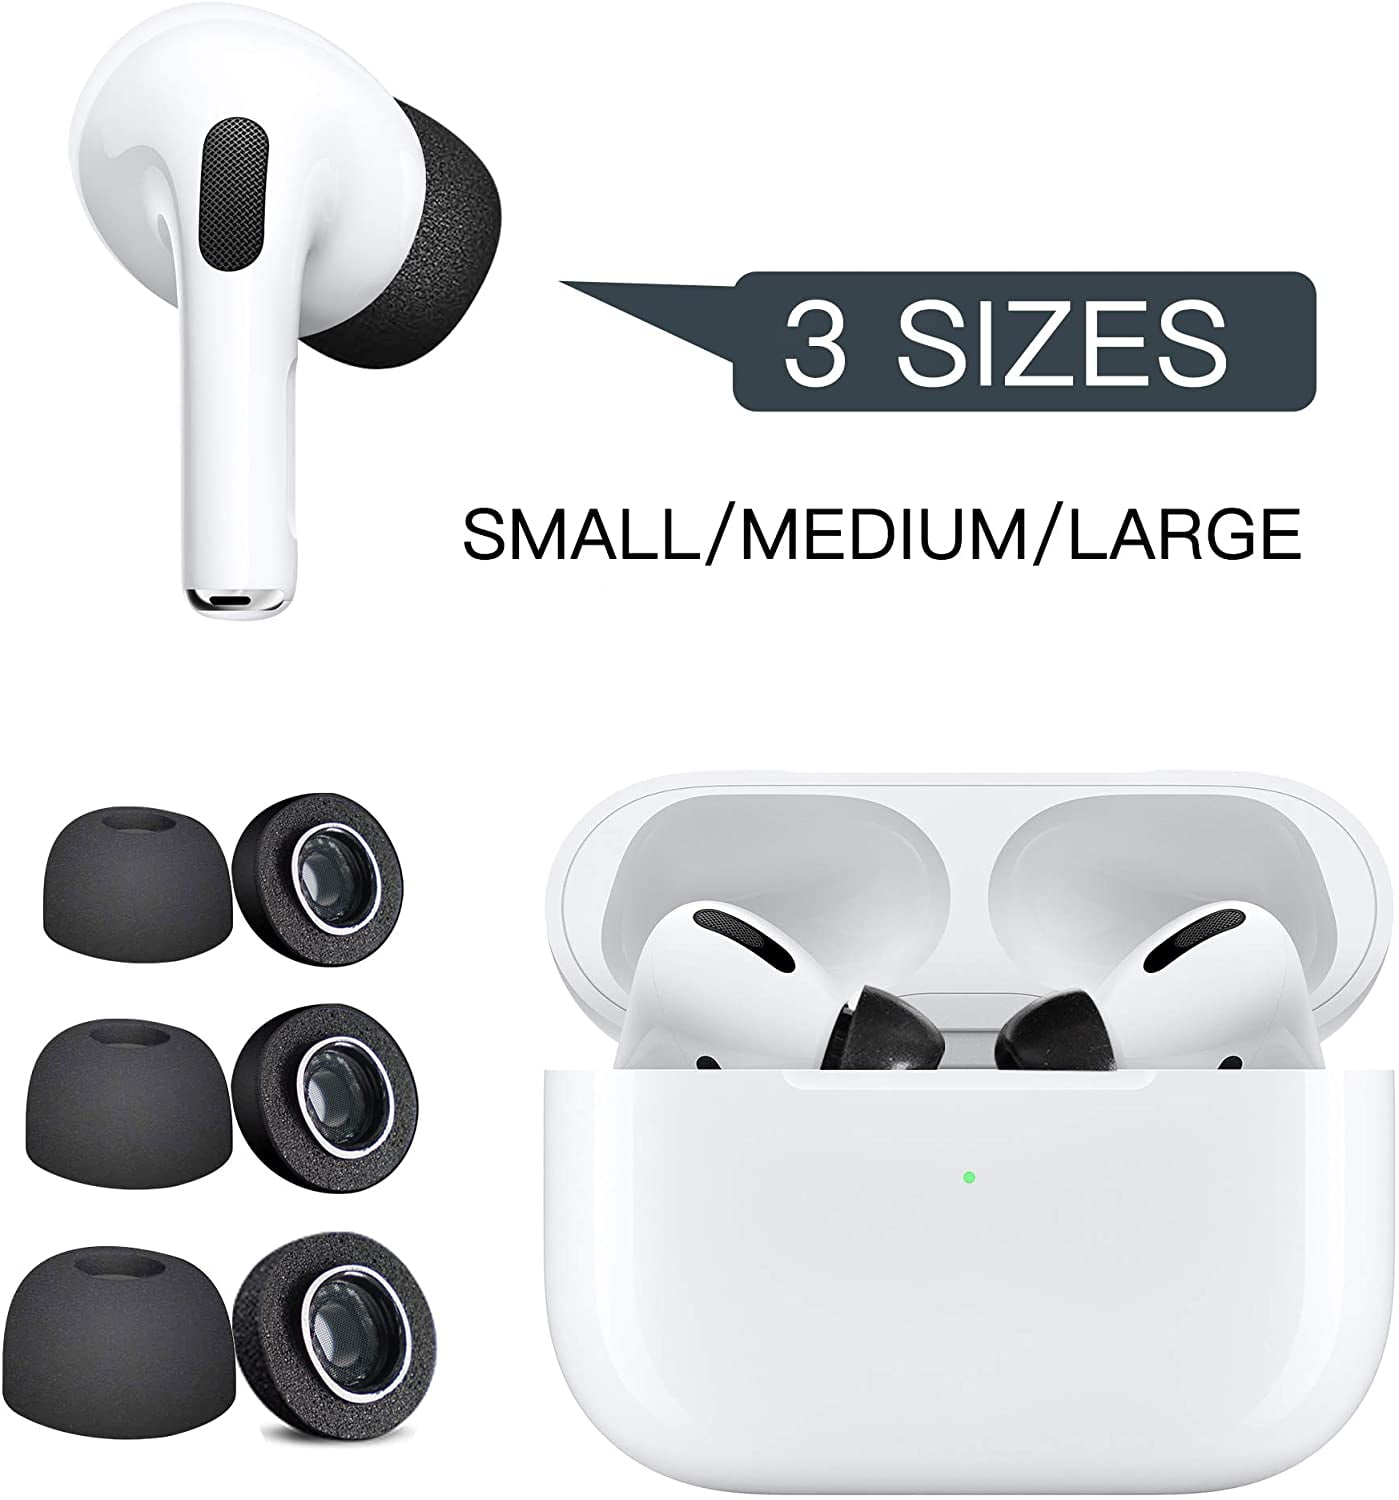 Black Memory Foam Replacement Tips for Apple Airpod Pro & Pro 2 Earbud Tips - Walmart.com